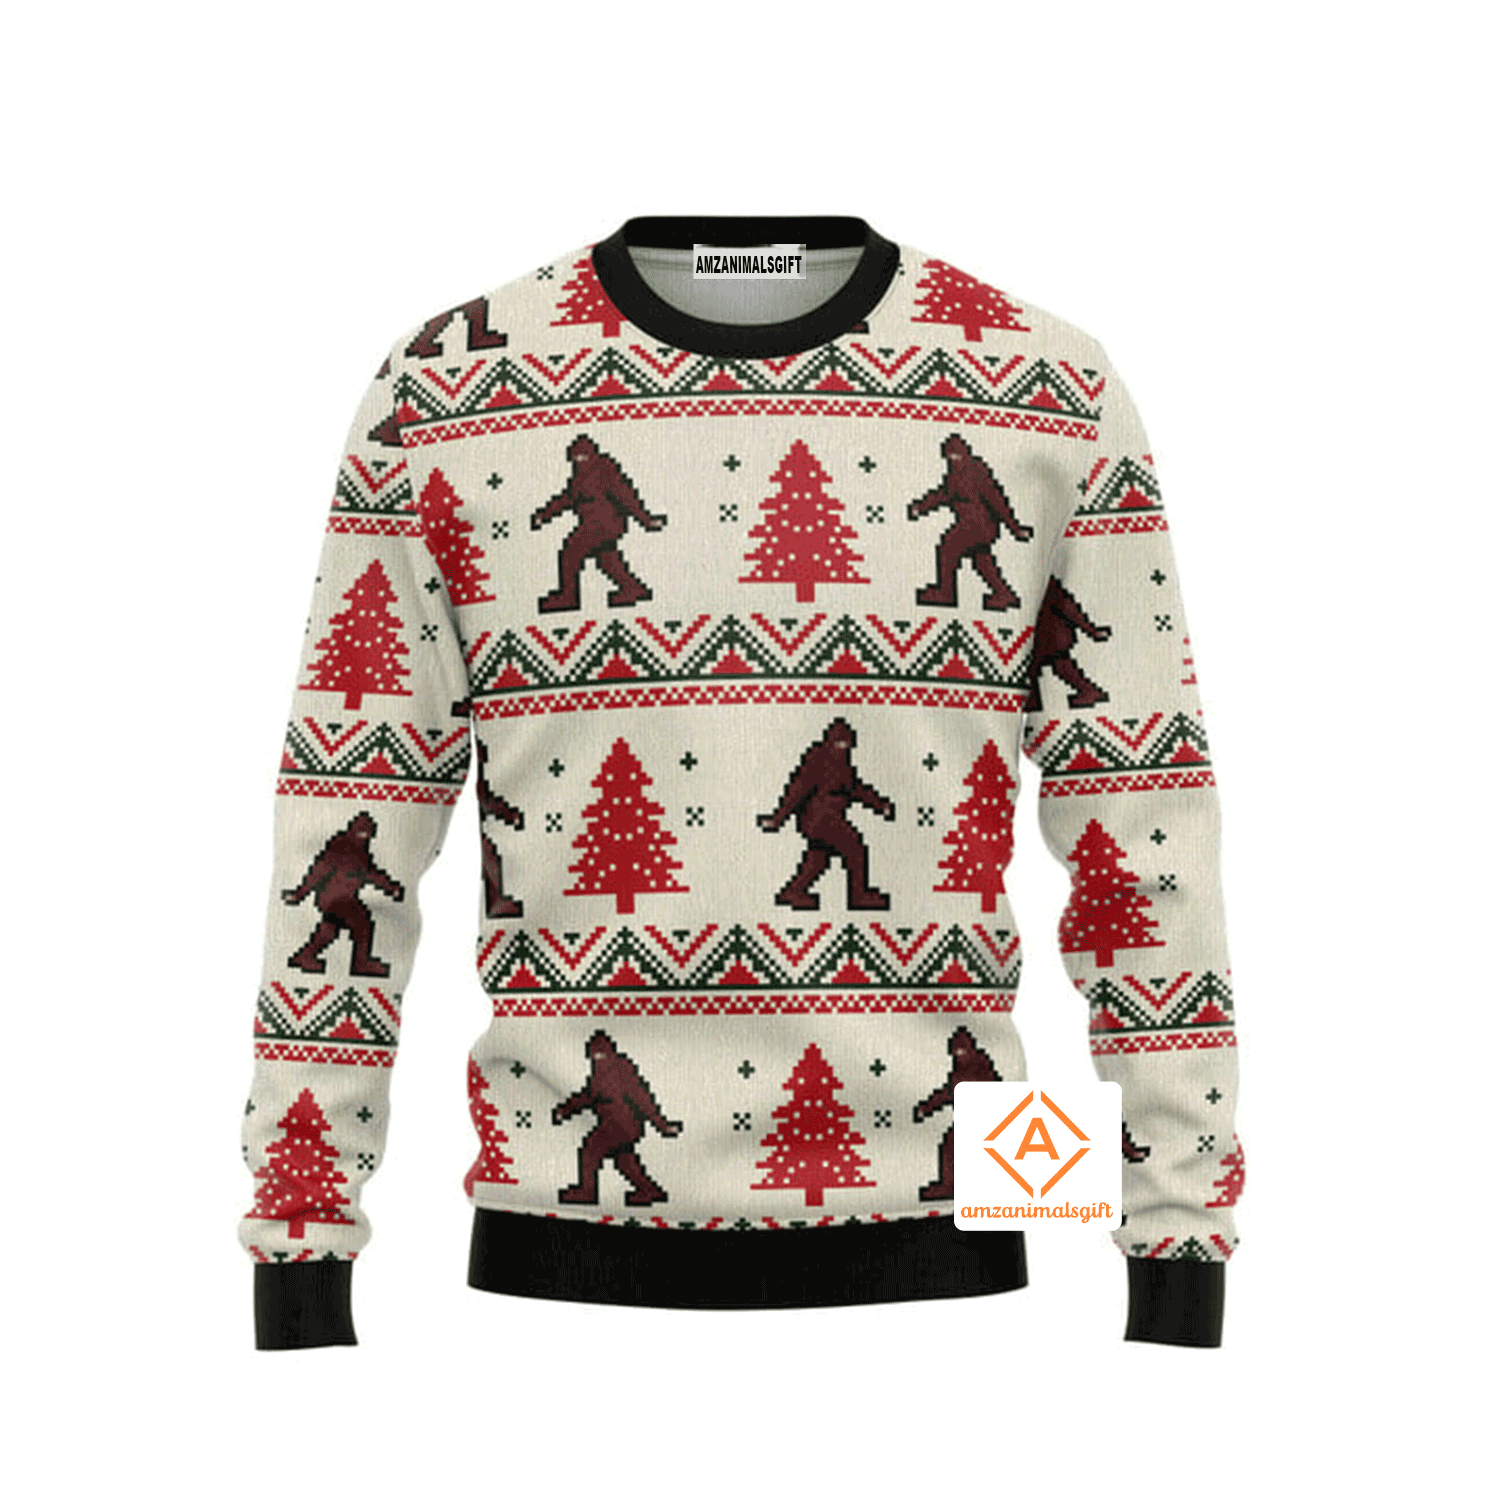 Amazing Bigfoot Christmas Sweater, Ugly Sweater For Men & Women, Perfect Outfit For Christmas New Year Autumn Winter